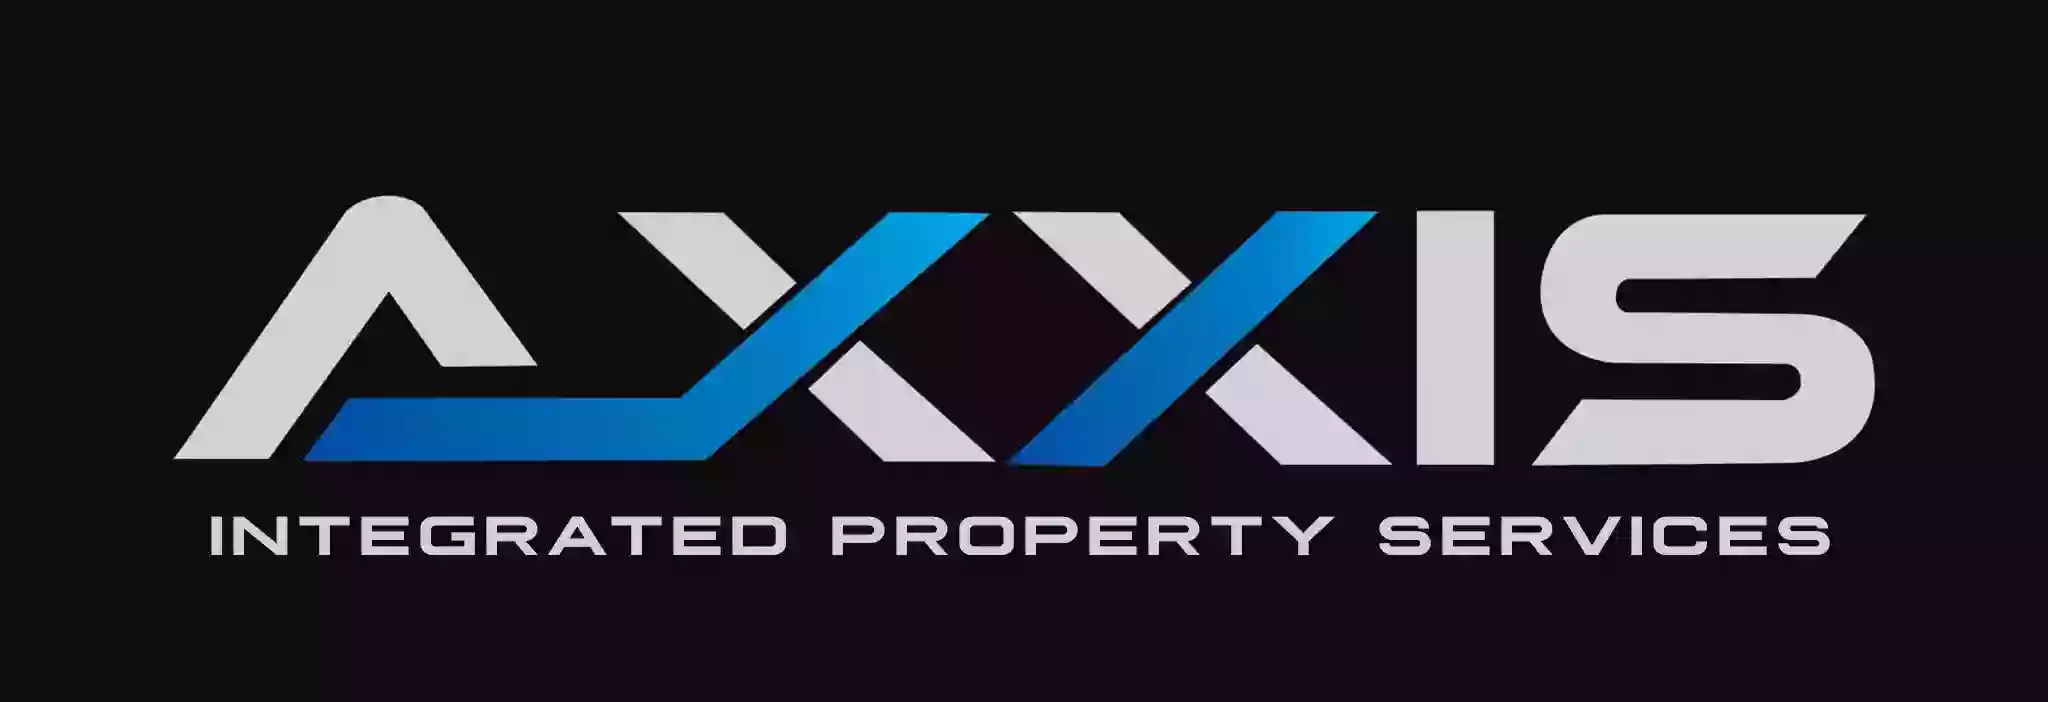 Axxis Integrated Property Services PTY LTD - Cleaning, Gardening & Property Maintenance Specialists